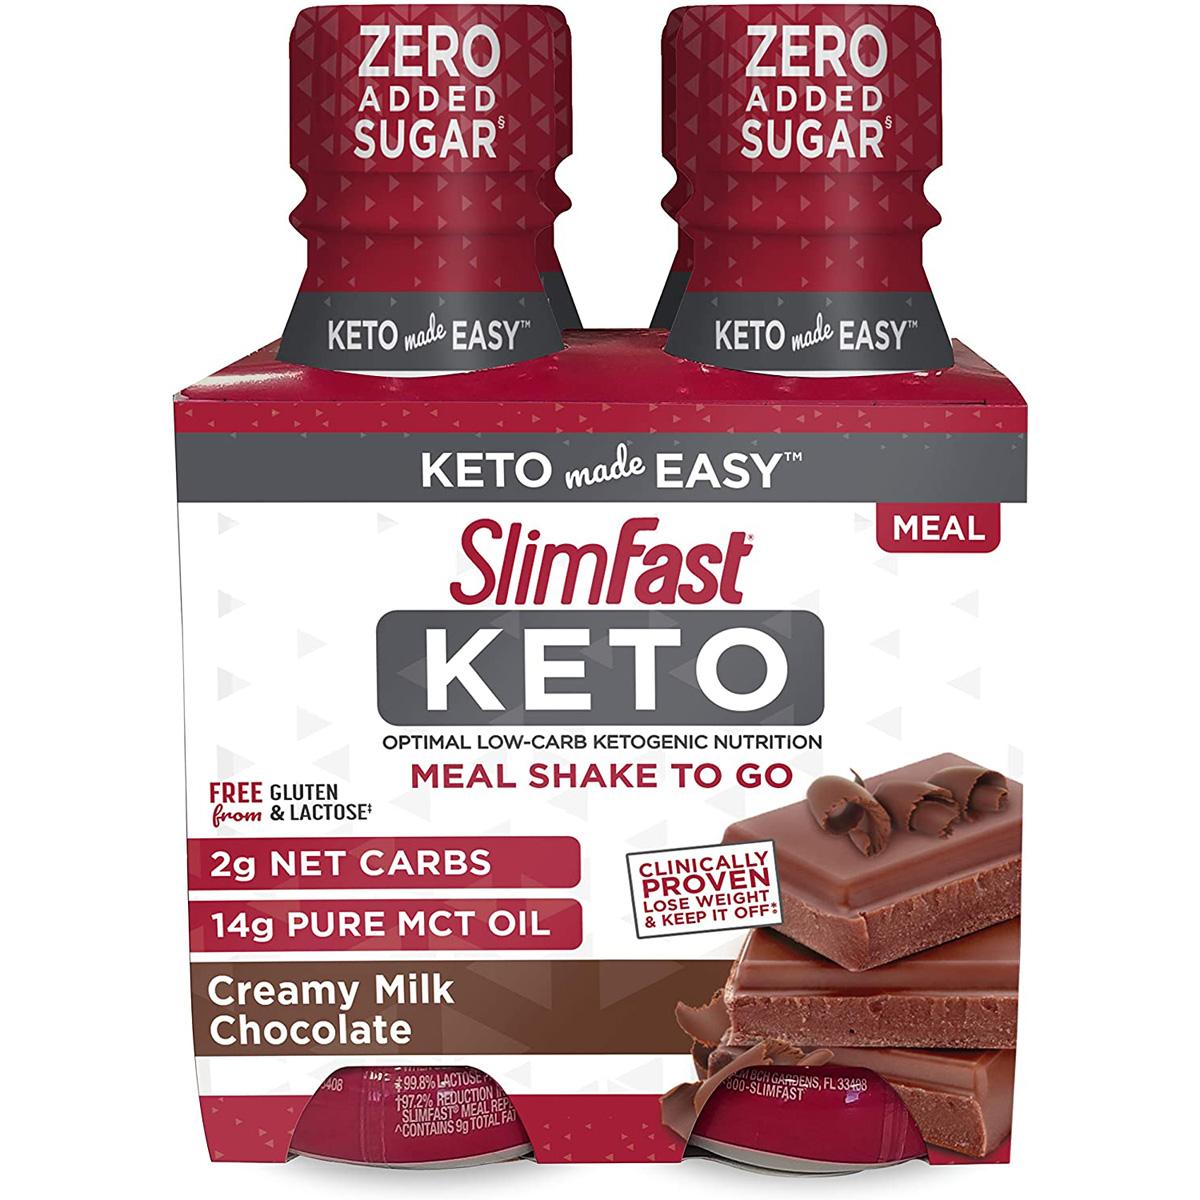 4 SlimFast Keto Ready to Drink Meal Replacement Shakes for $4.89